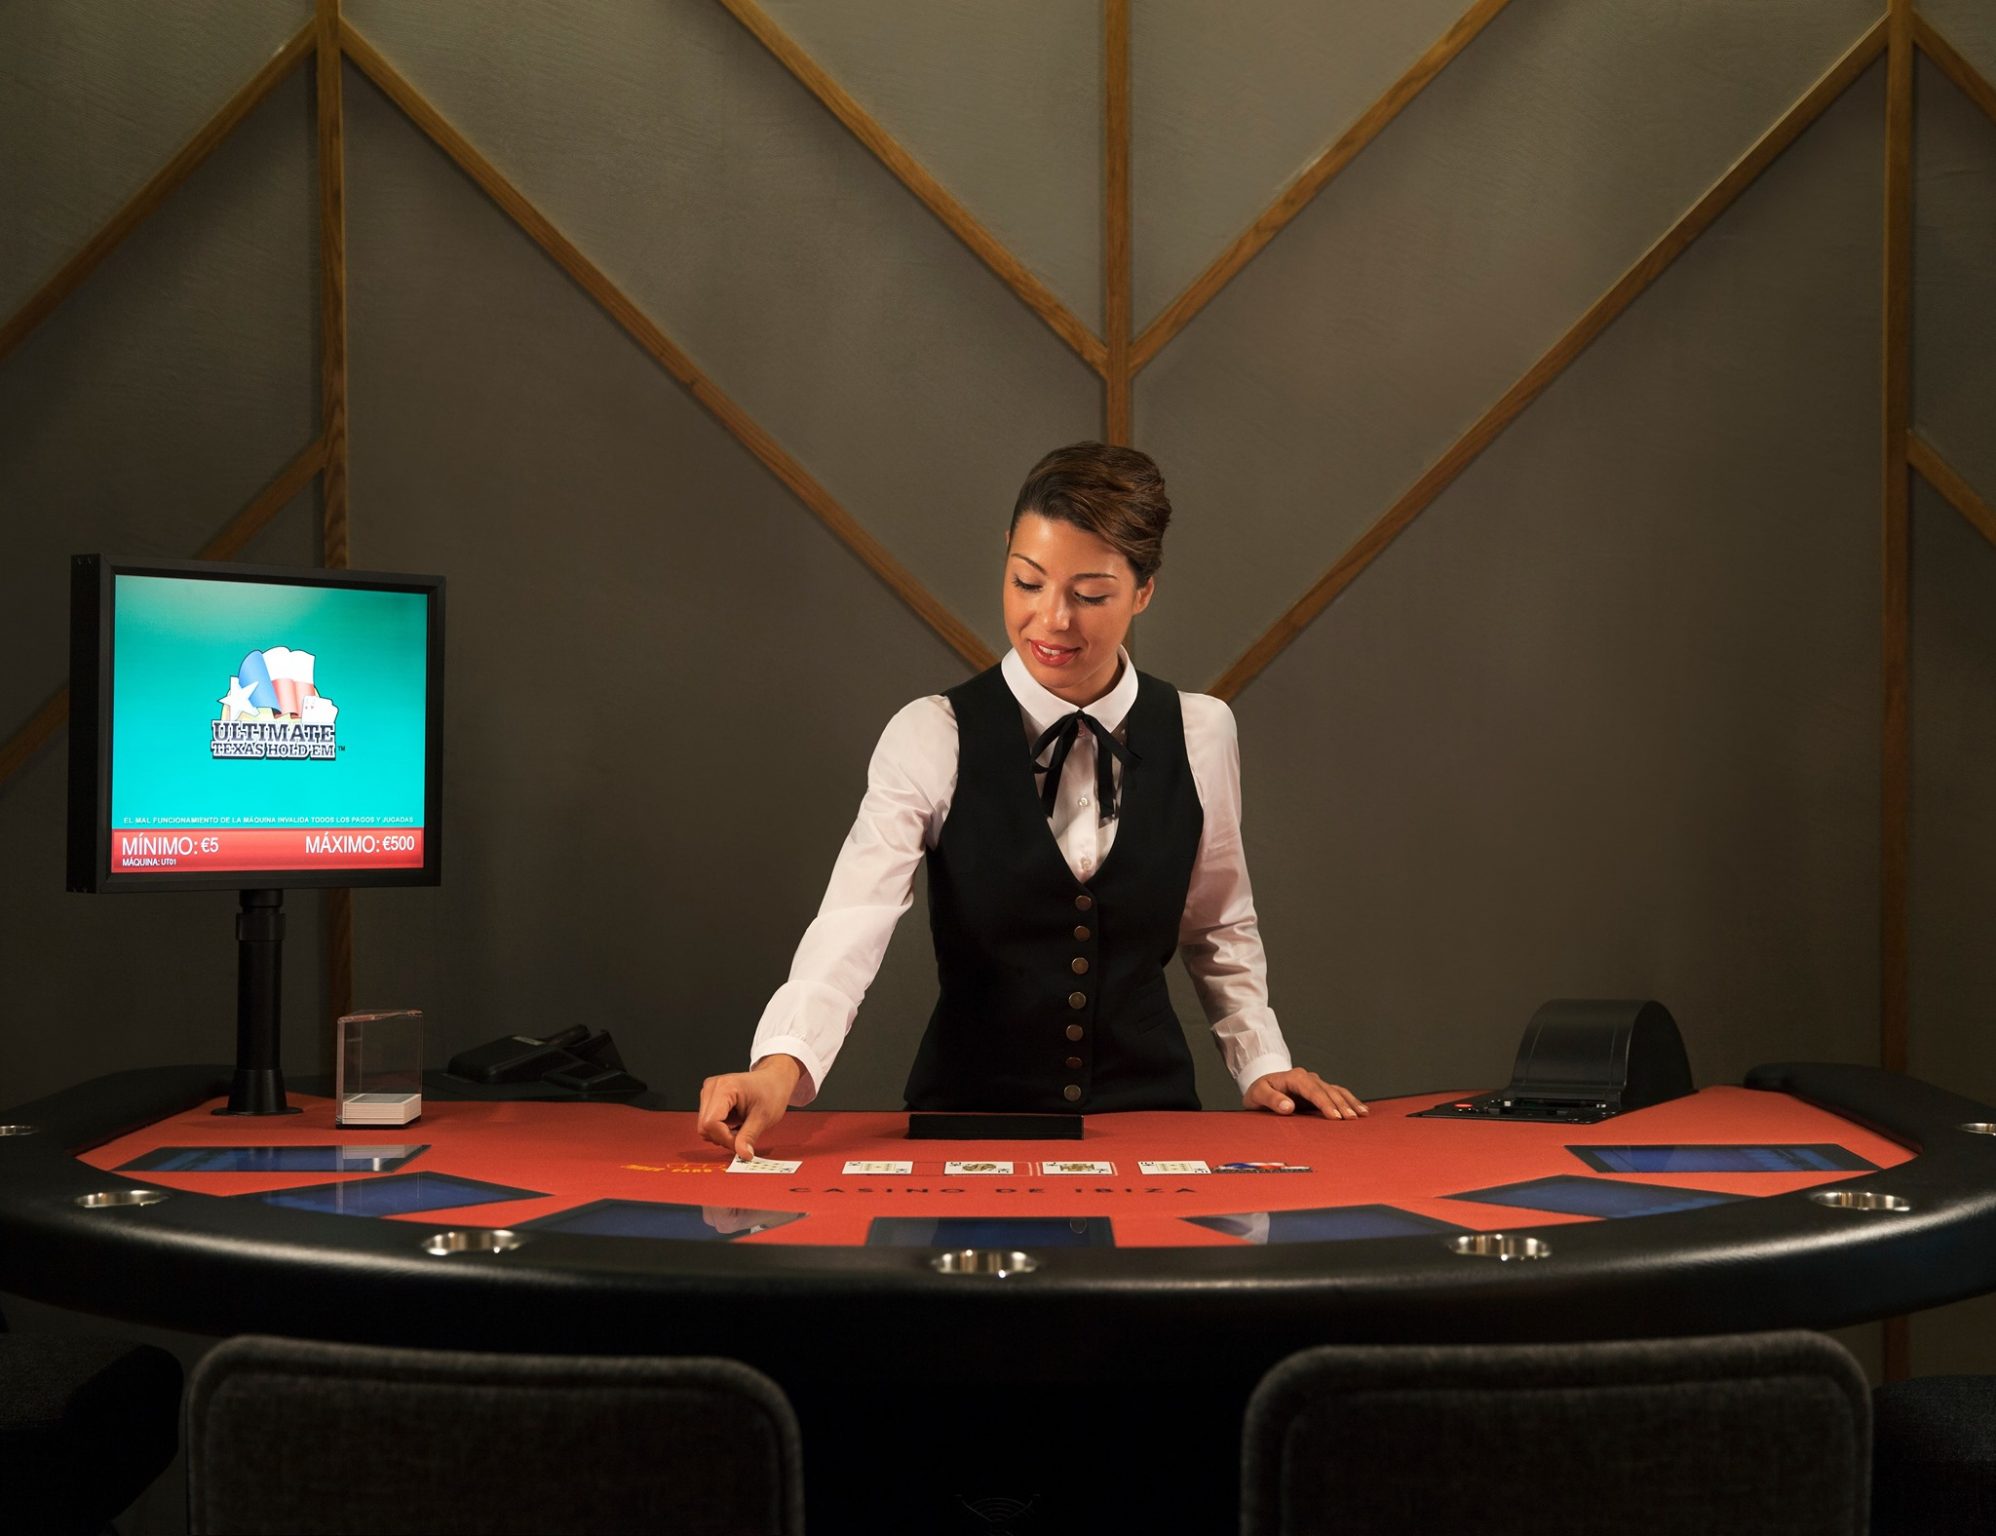 Does Your casino Goals Match Your Practices?